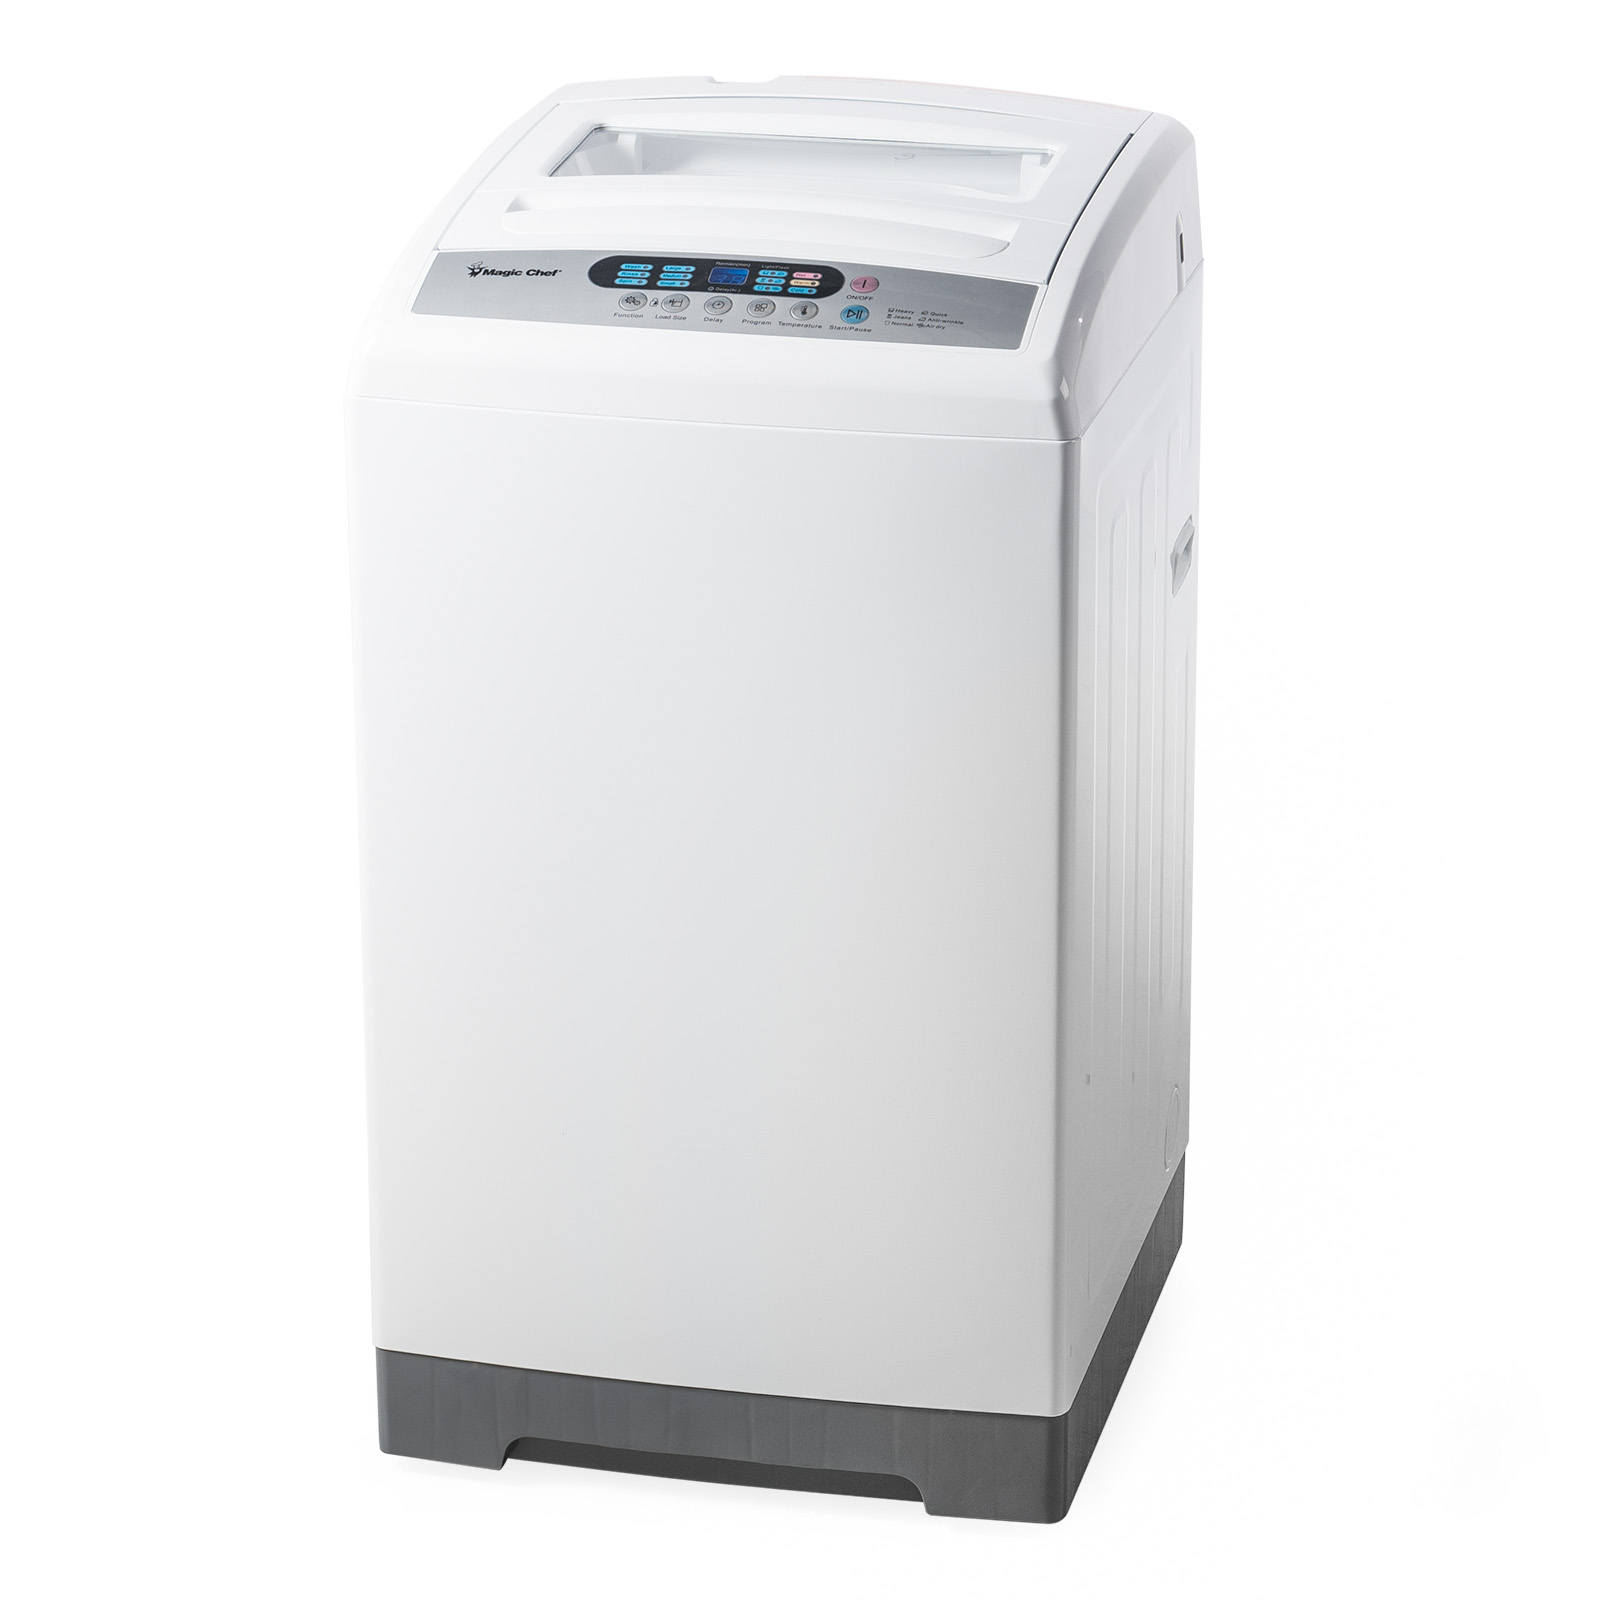 Magic Chef 1.6 cu ft Topload Compact Washer, White - image 1 of 22